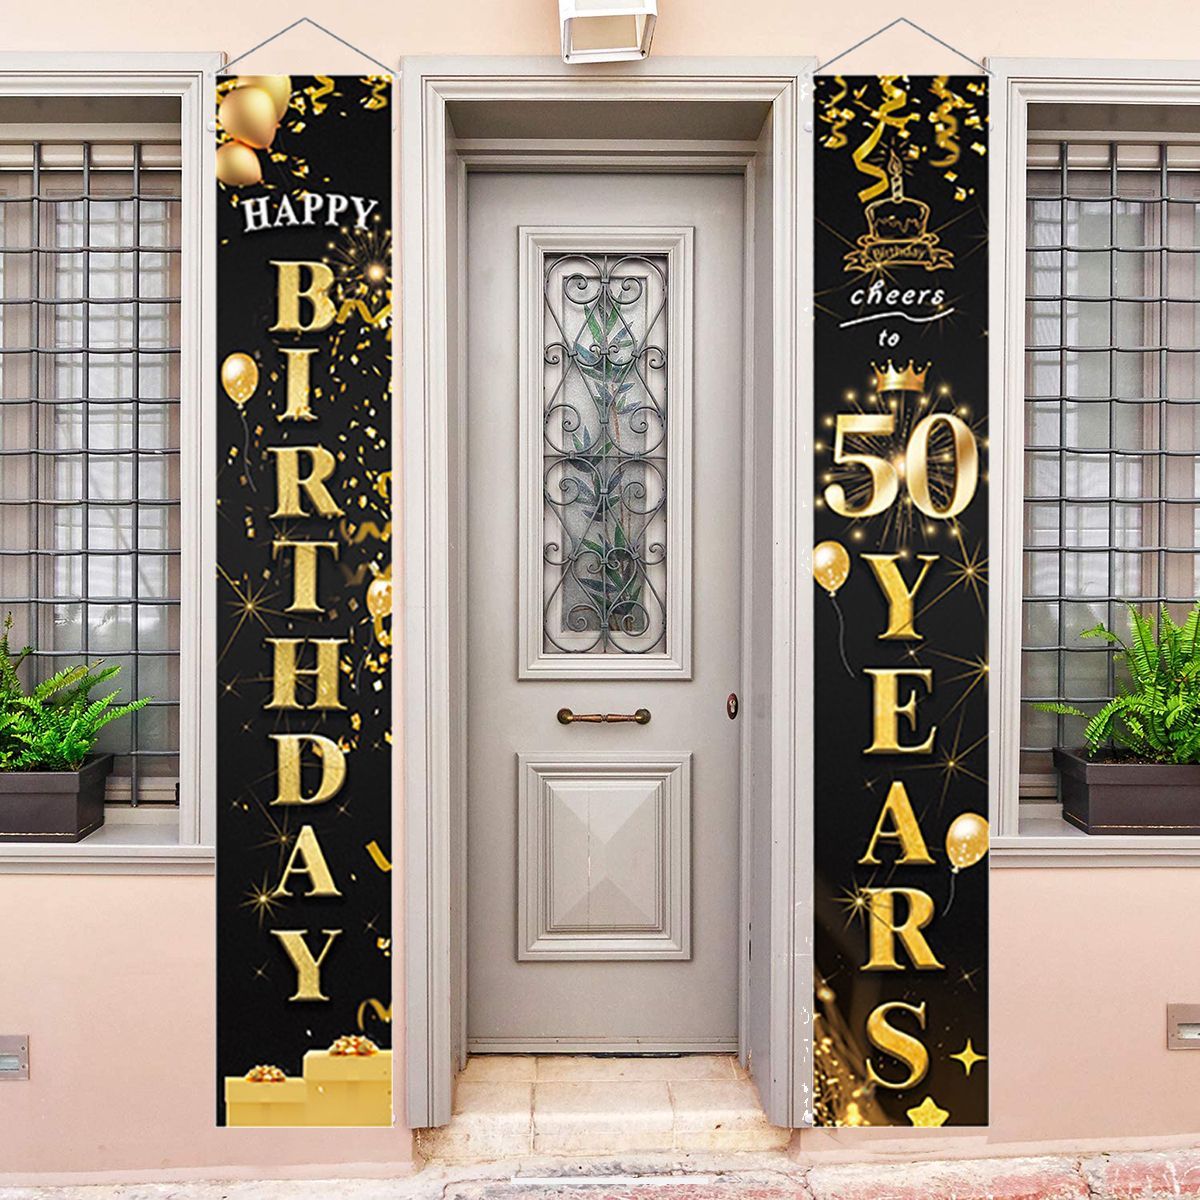 Happy-Birthday-Bunting-Banner-Door-Wall-Hanging-Decor-Couple-Party-Holidays-1830509